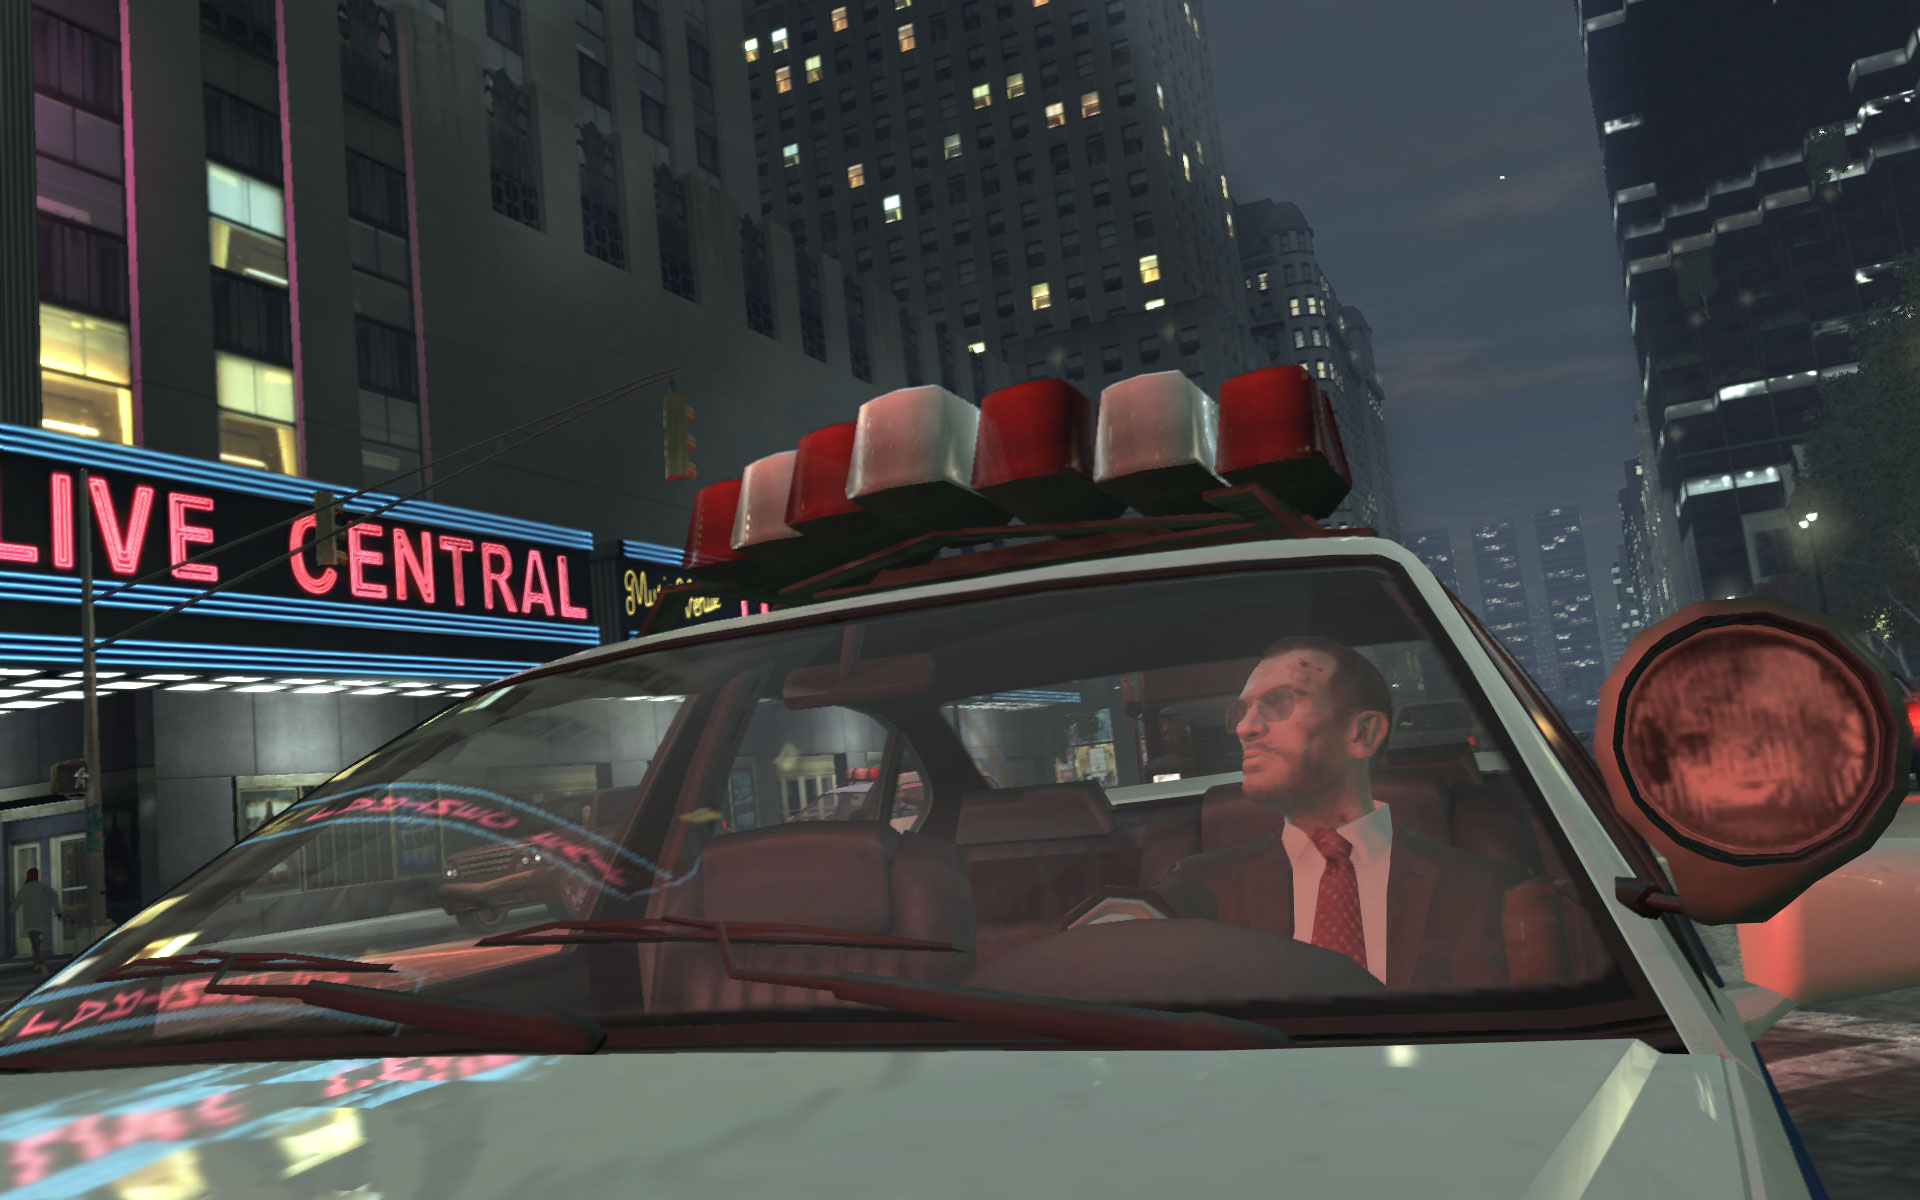 gta iv update patch version 1.0 7.0 download